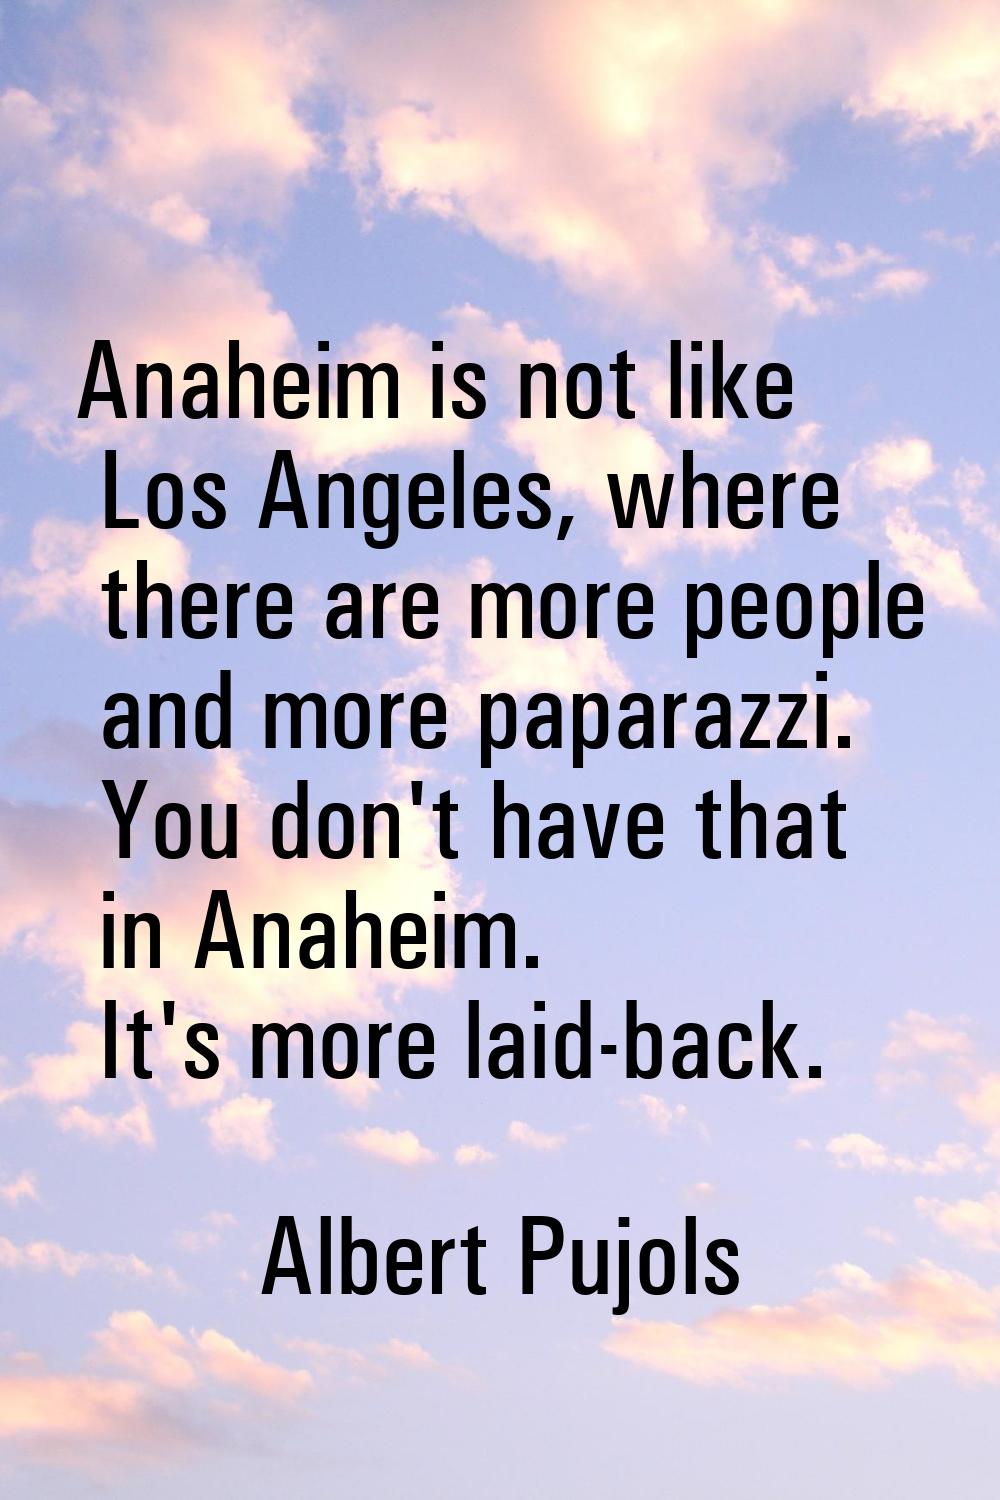 Anaheim is not like Los Angeles, where there are more people and more paparazzi. You don't have tha